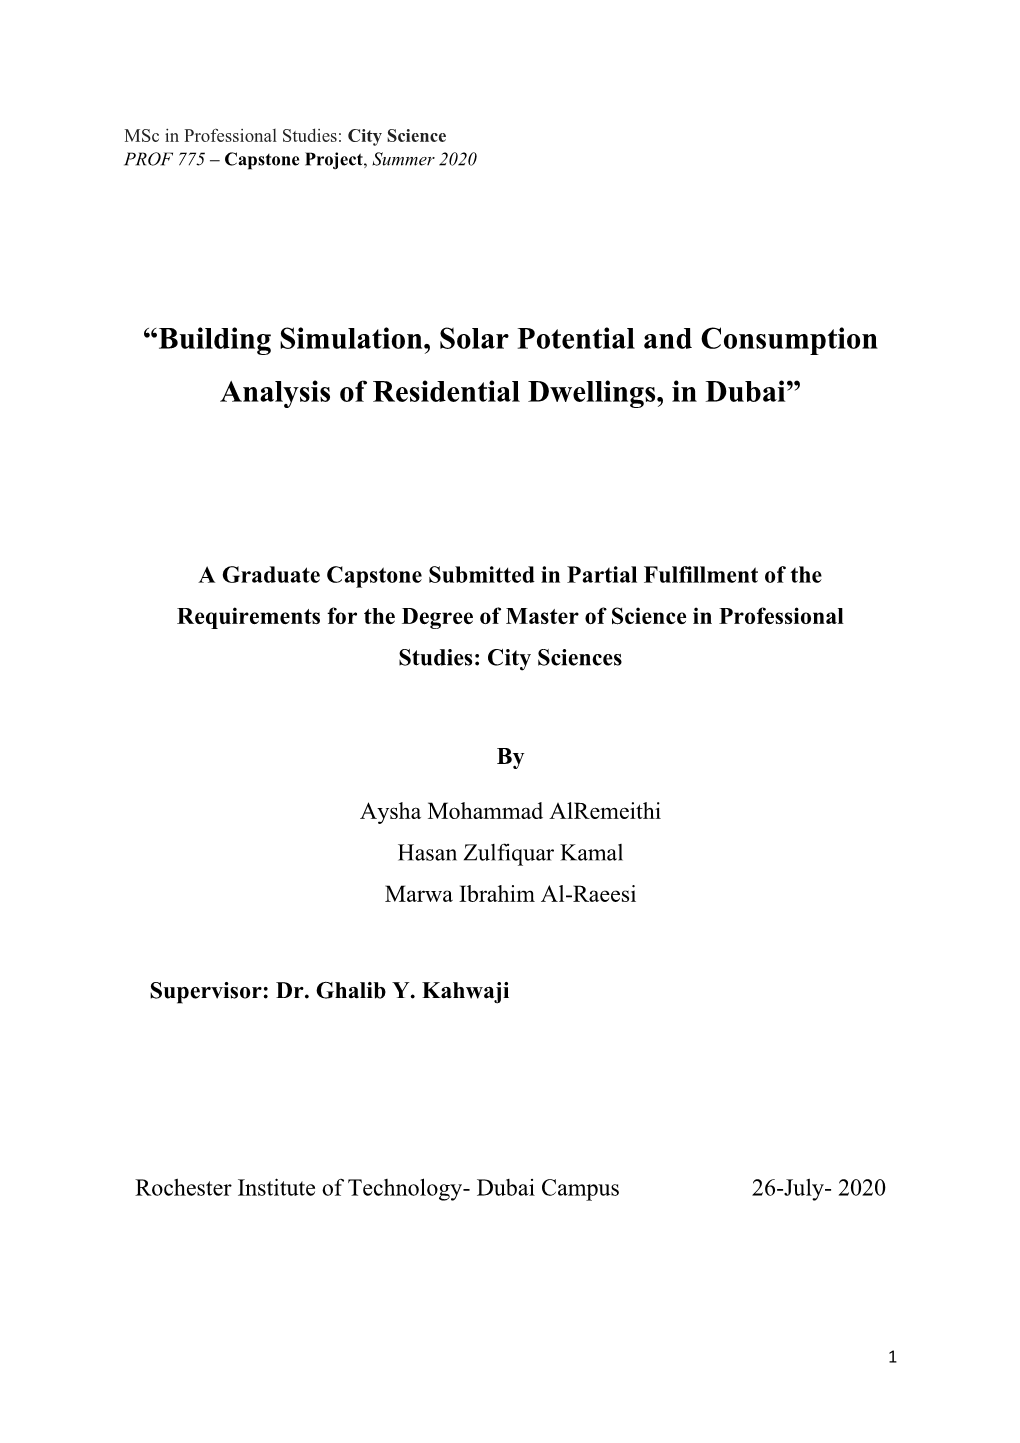 “Building Simulation, Solar Potential and Consumption Analysis of Residential Dwellings, in Dubai”